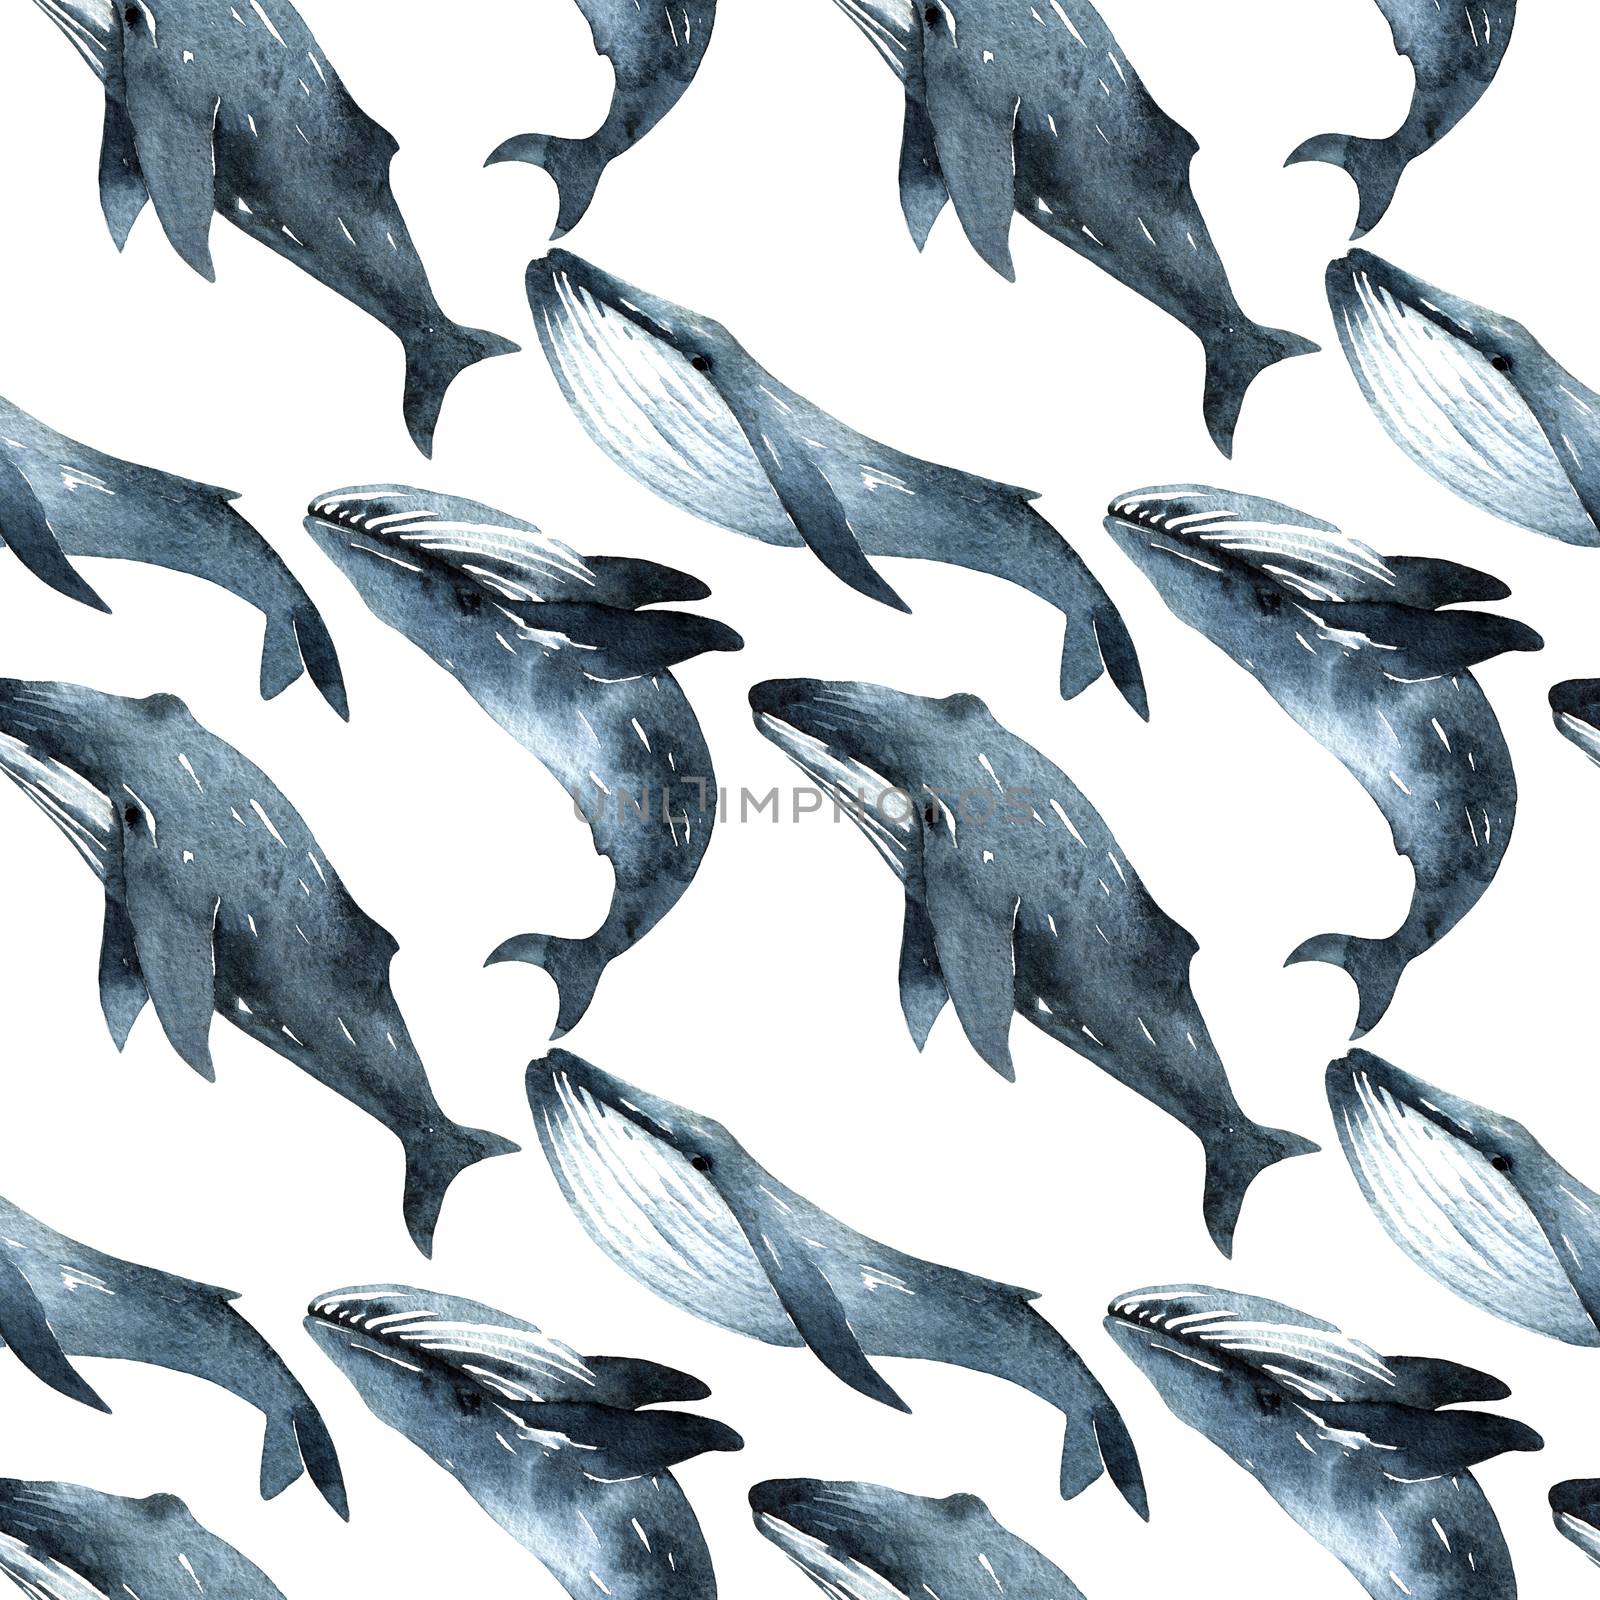 Watercolor illustration of floating blue whale. Seamless pattern background.